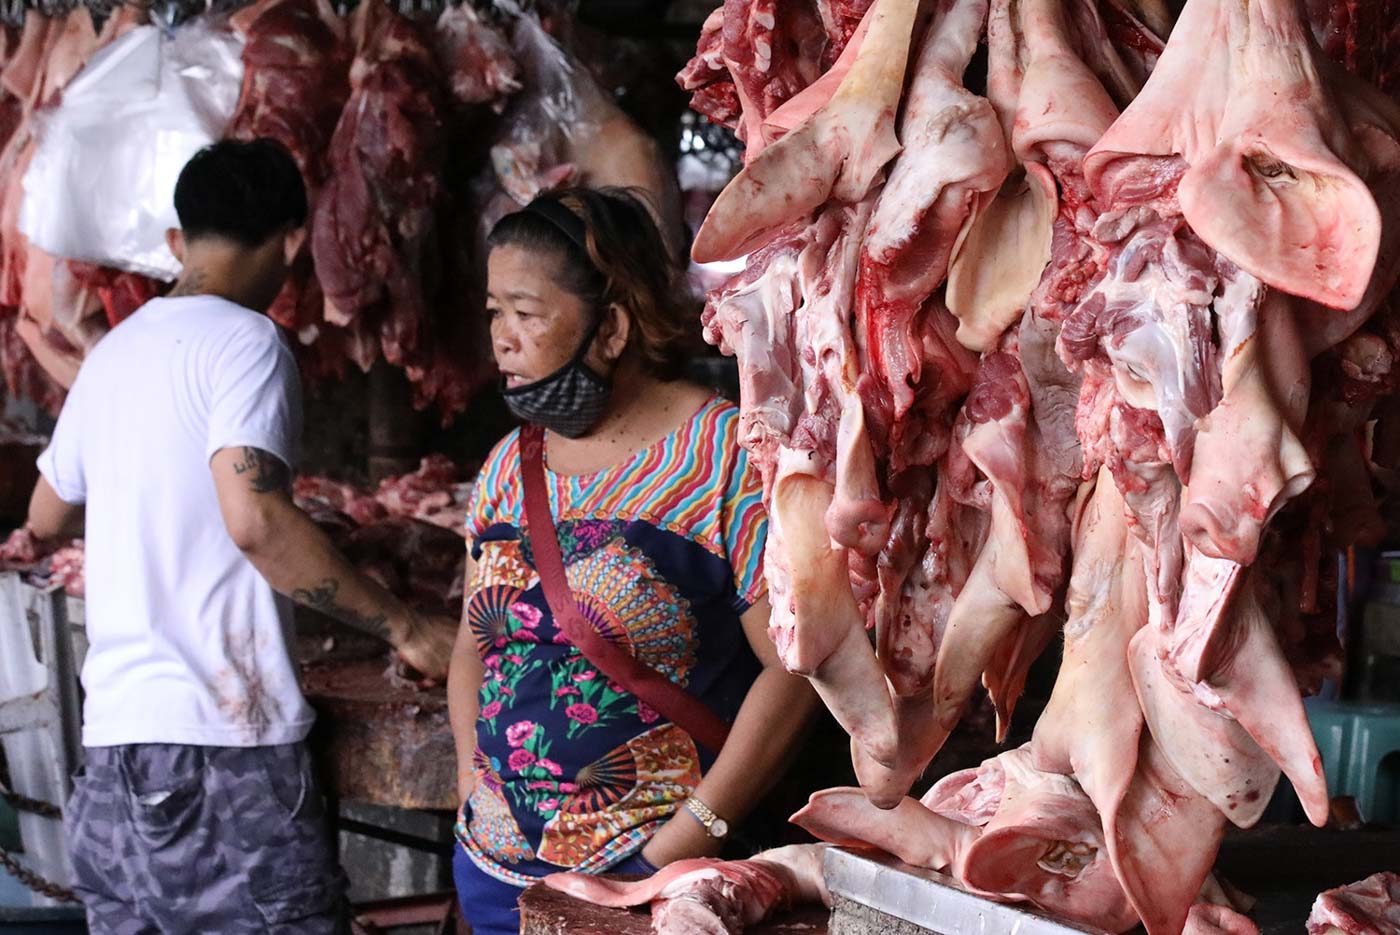 Agriculture department evades questions as pigs die in Luzon